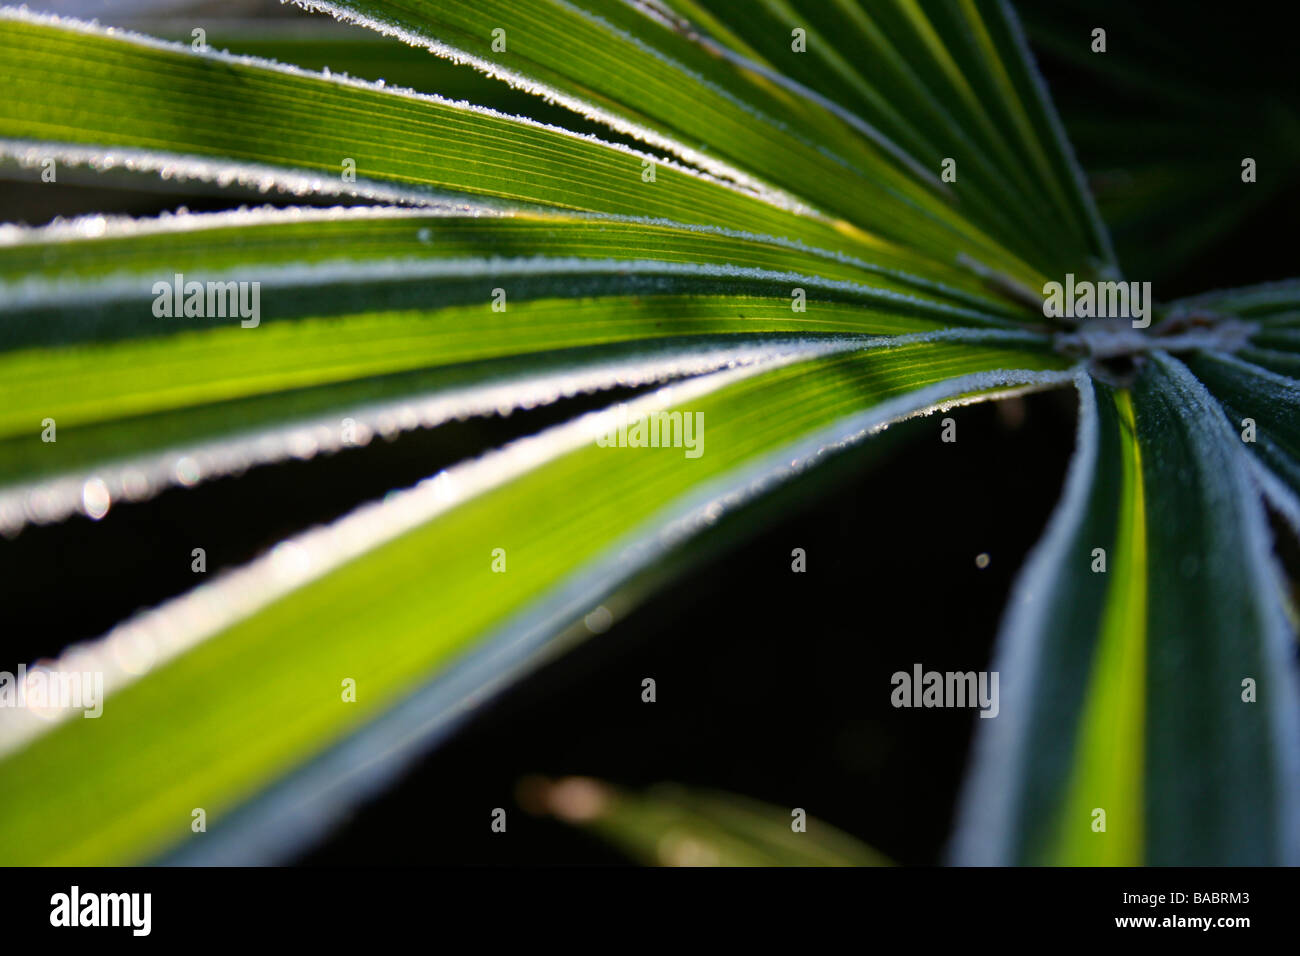 Trachycarpus fortunei / Chusan palm leaf with frost catching sunlight, dark background Stock Photo